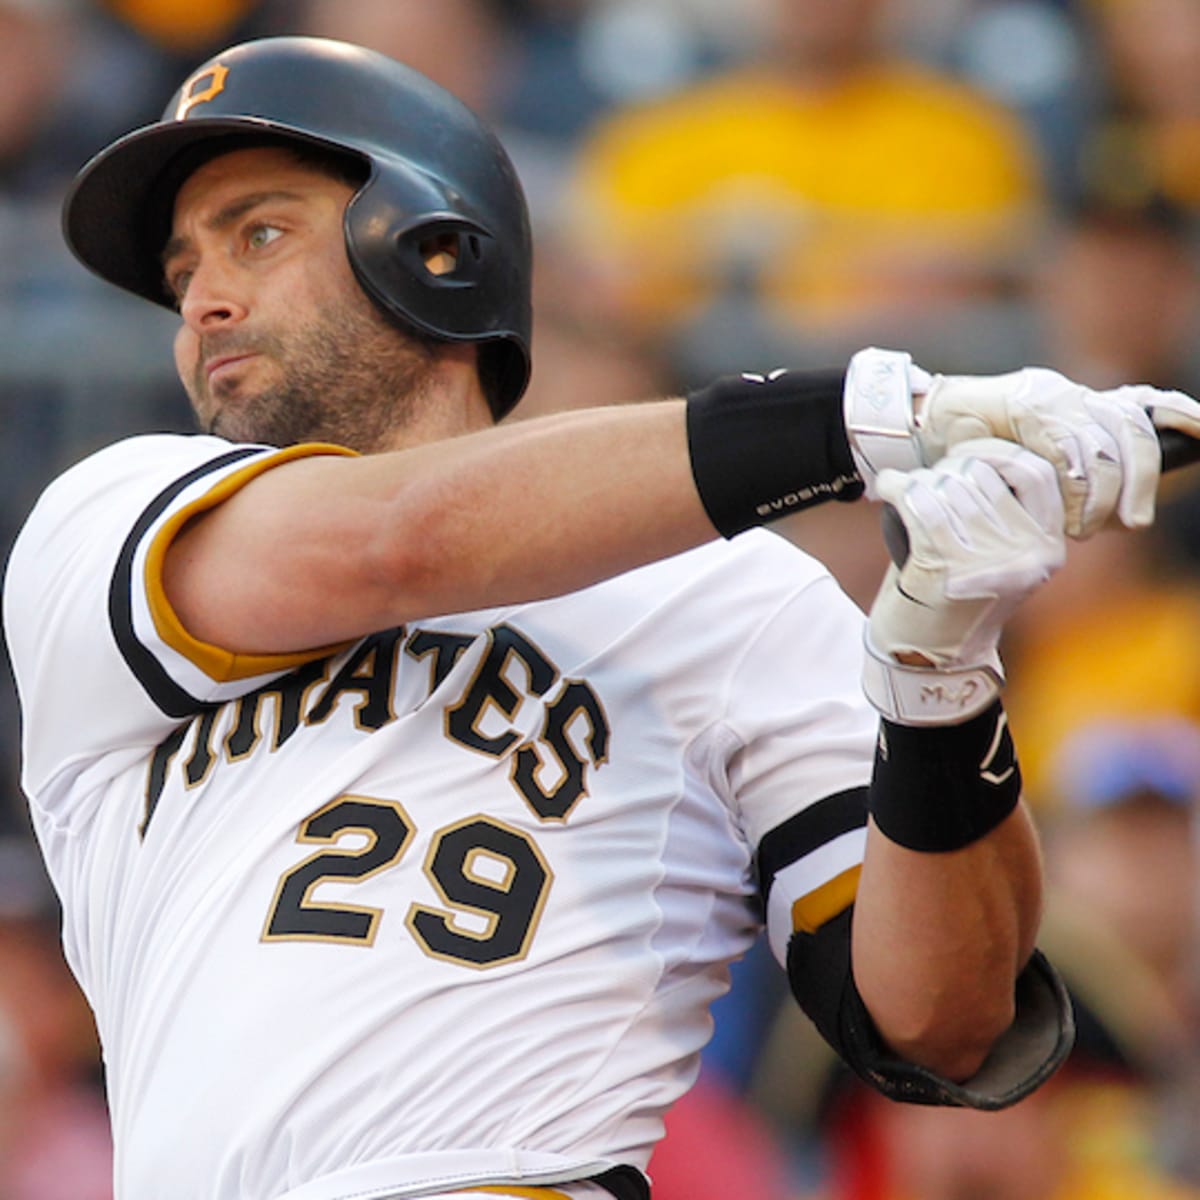 Pirates cut ties with catcher Francisco Cervelli